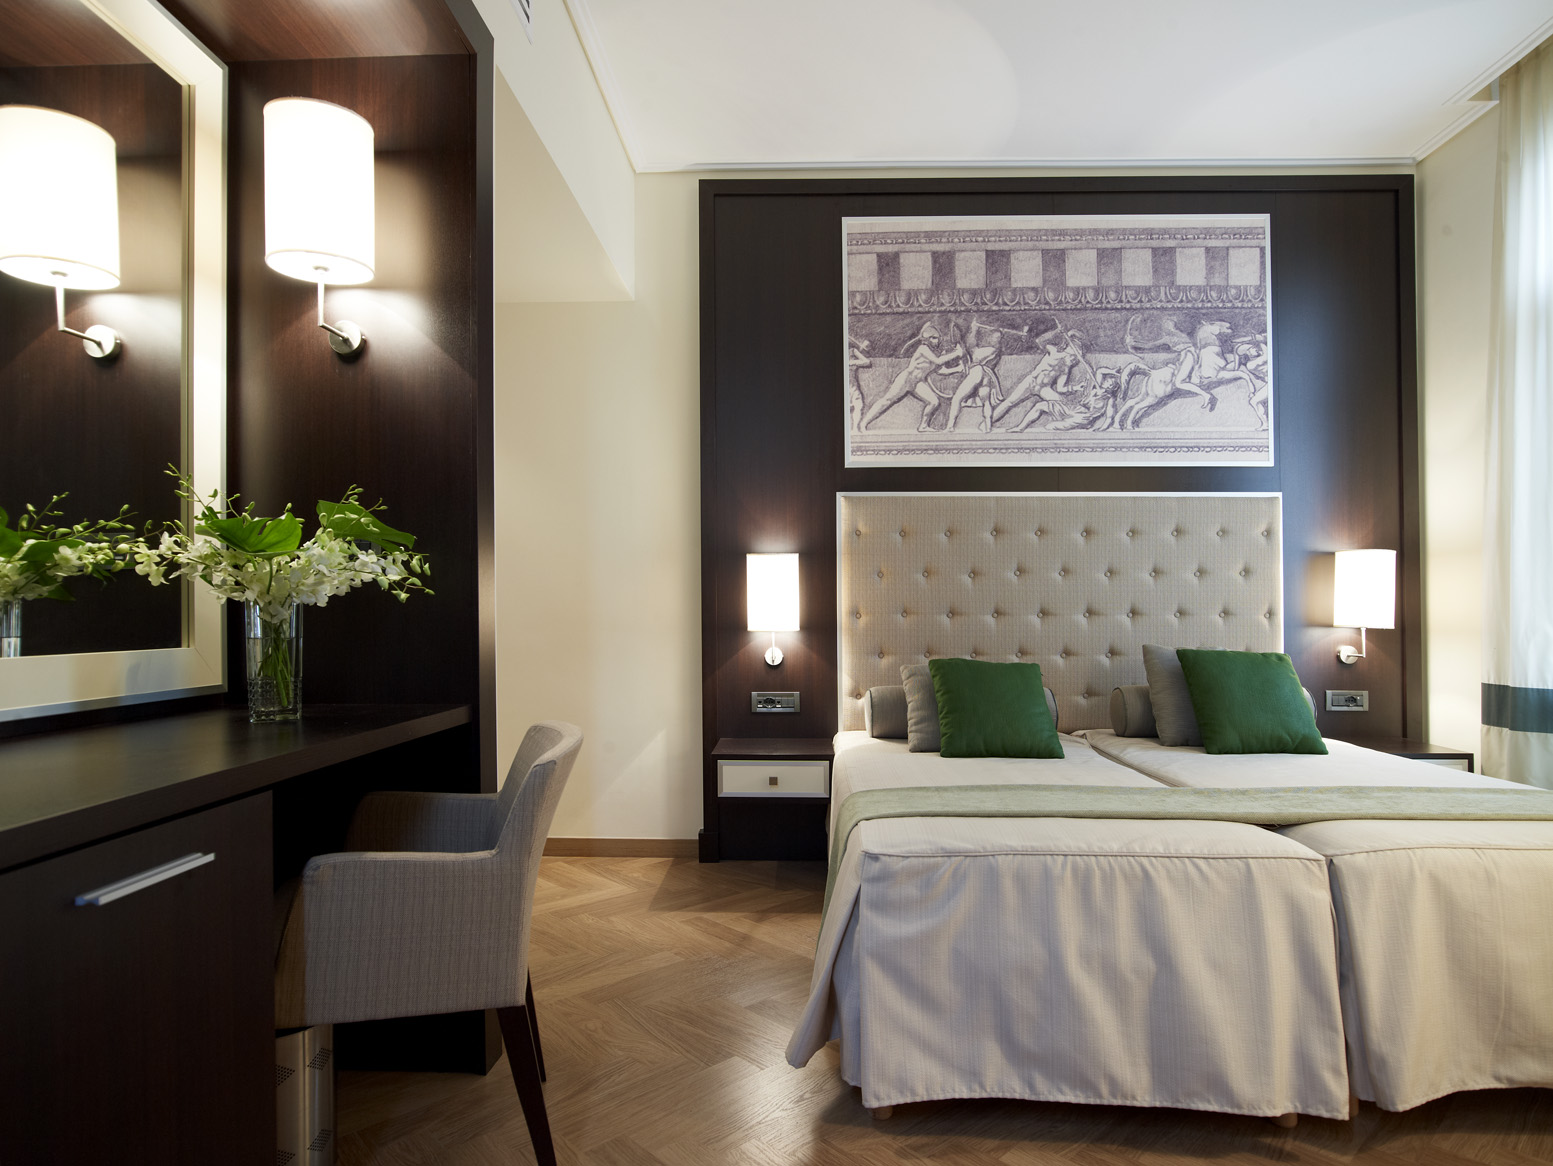 Example of classic Hotel rooms - Gitaly contract